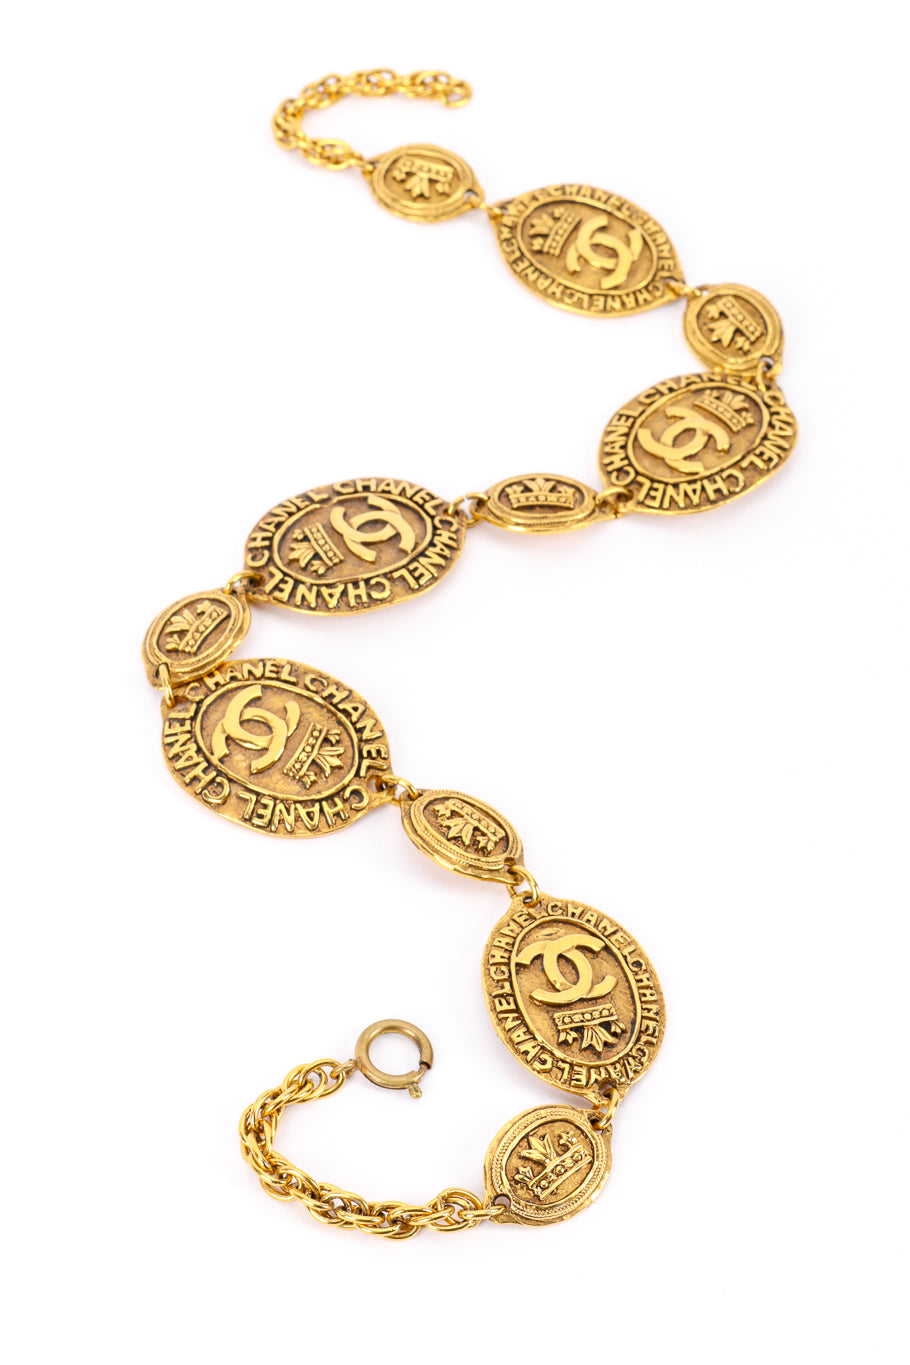 CC Crown Medallion Necklace by Chanel in swirl @recessla